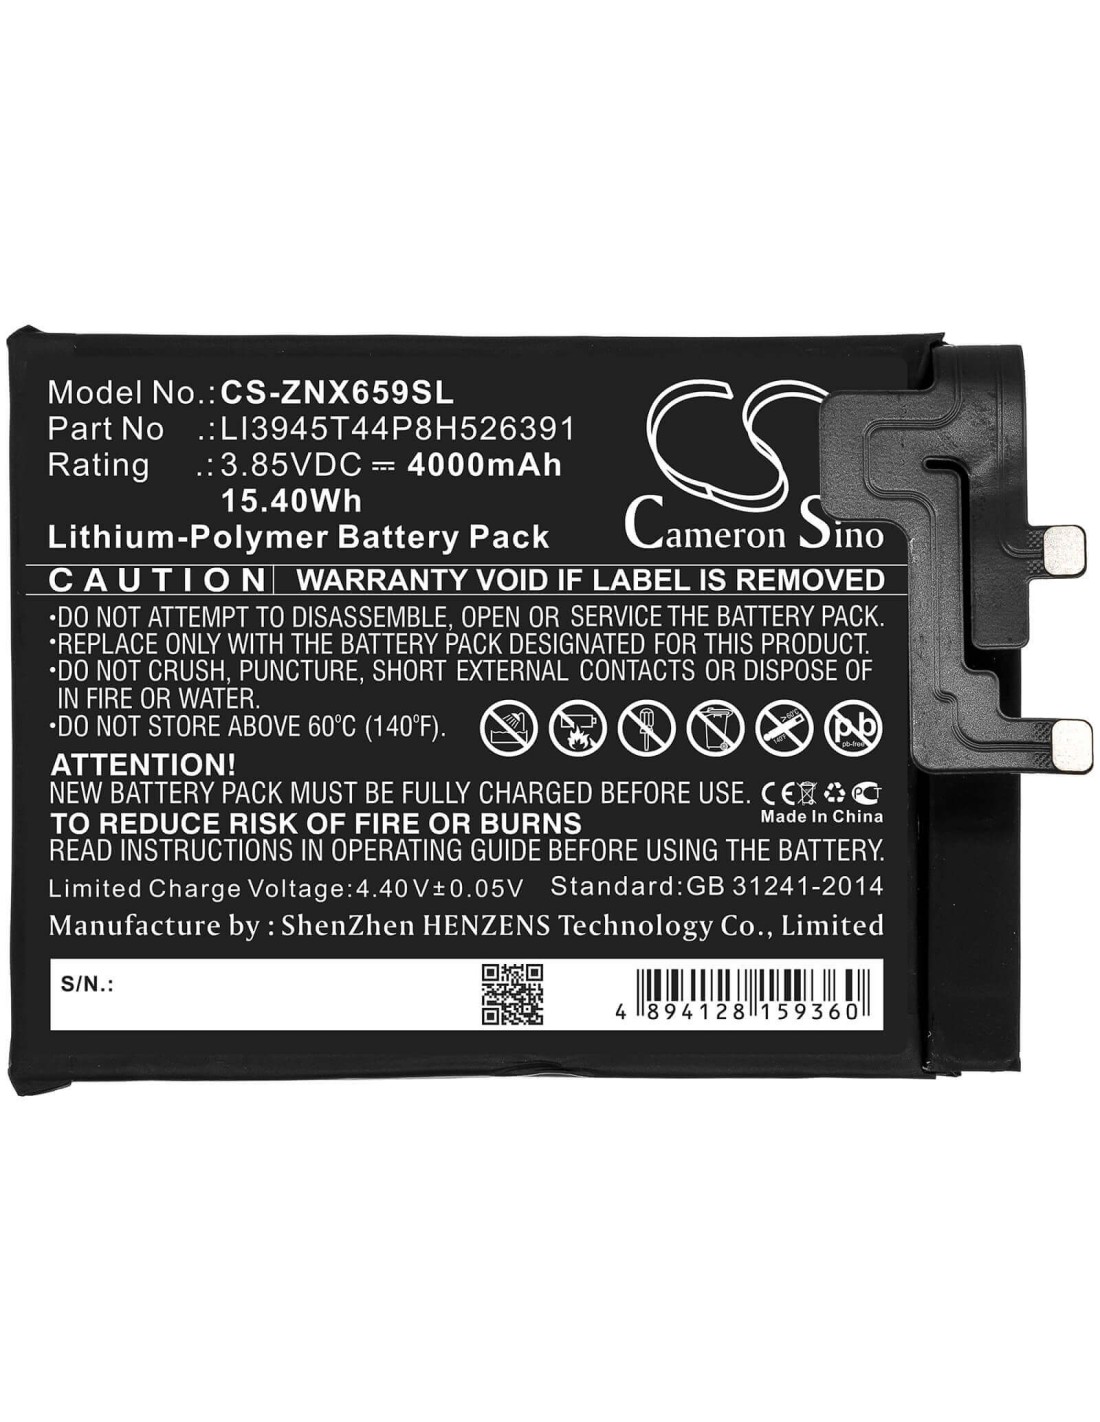 Battery for Nubia, Nx659j, Red Magic 5g, Zte 3.85V, 4000mAh - 15.40Wh